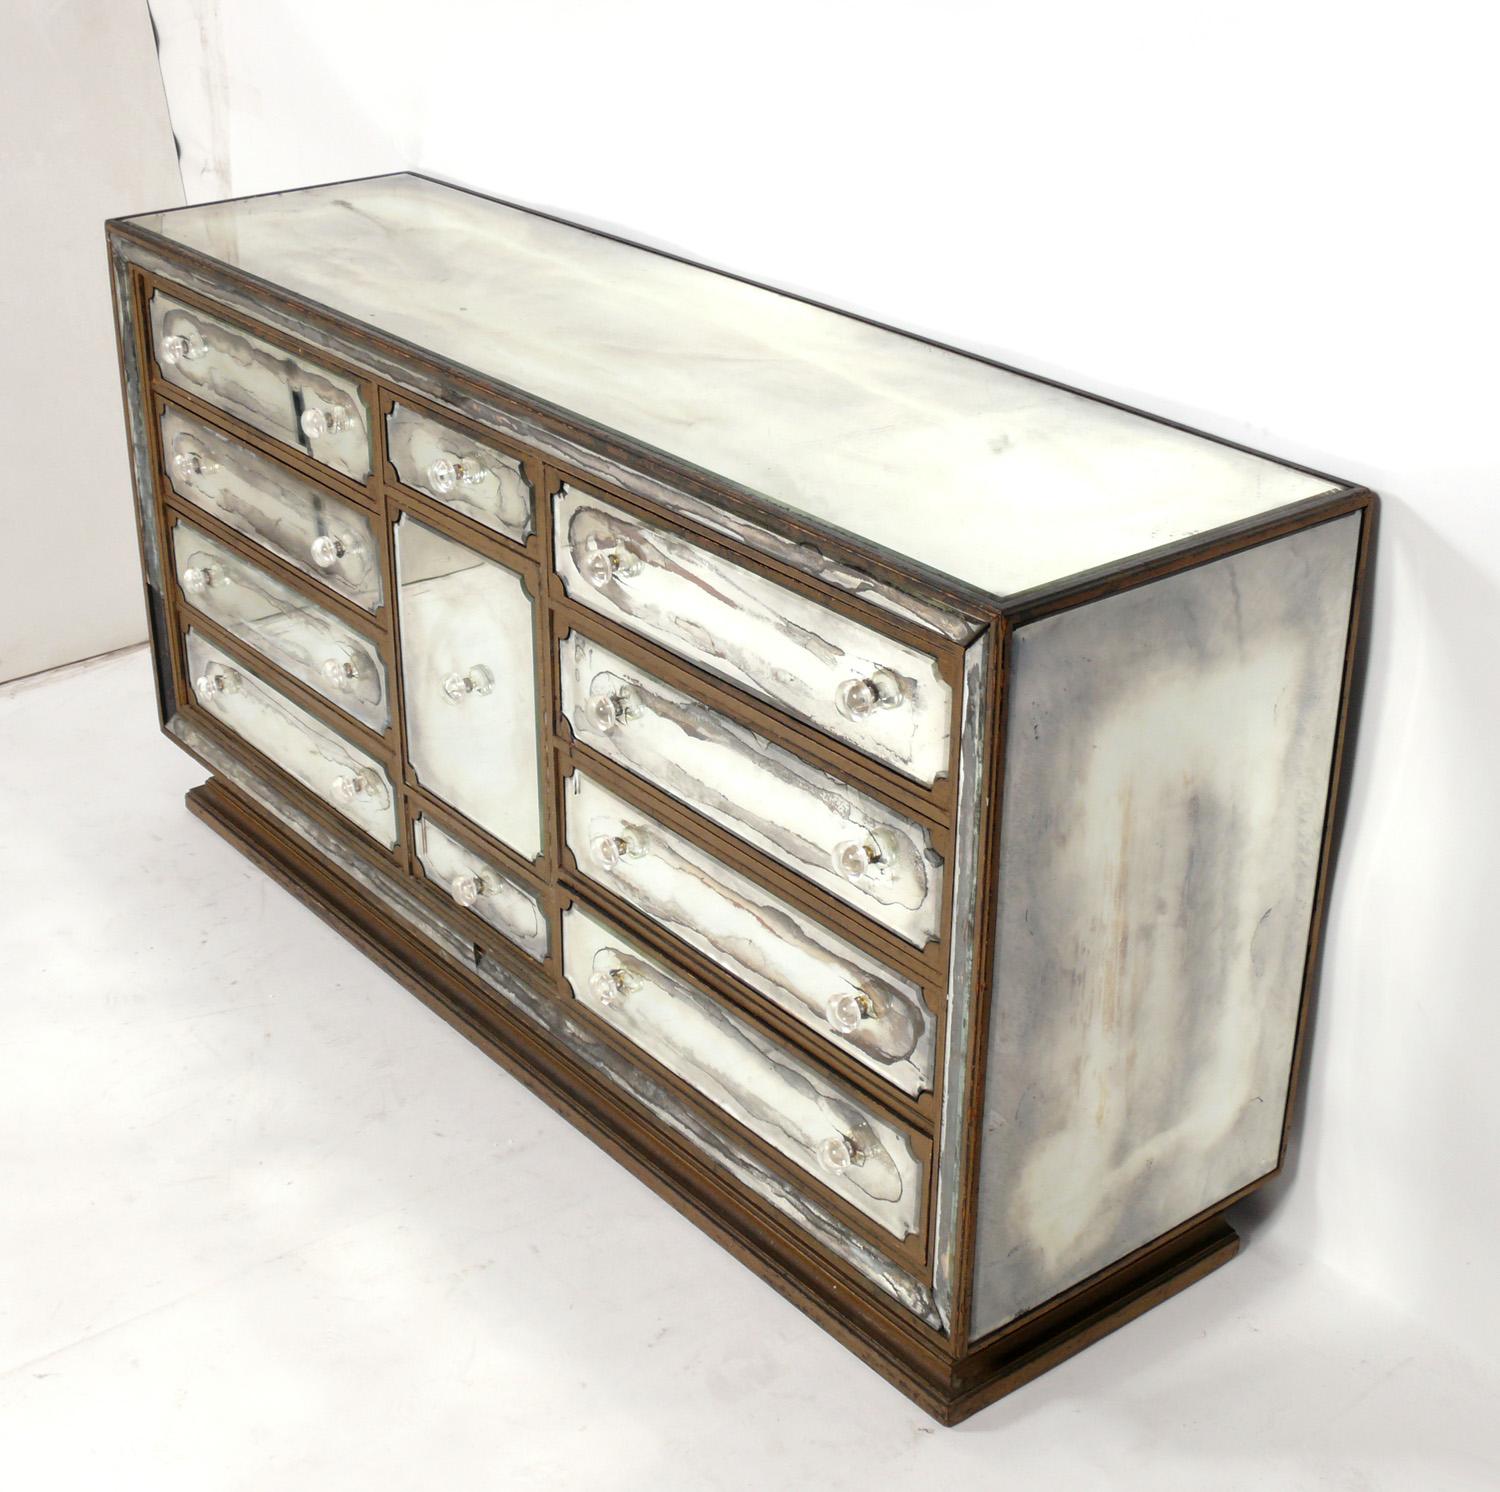 Glamorous mirrored chest, American, circa 1940s. Retains it's wonderful distressed original patina. It offers a voluminous amount of storage with 8 deep, wide drawers and two smaller central drawers and a center door that opens to reveal a